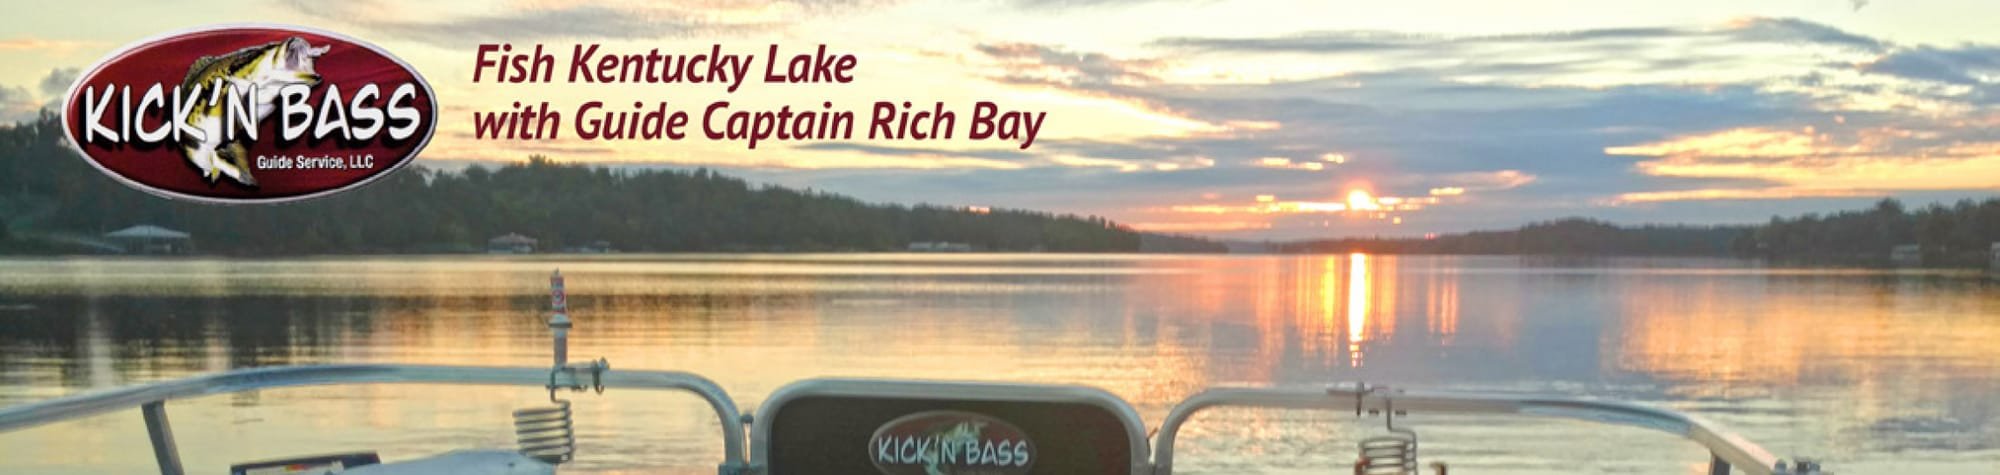 Your Kick'n Bass Fishing Report for June 11, 2019